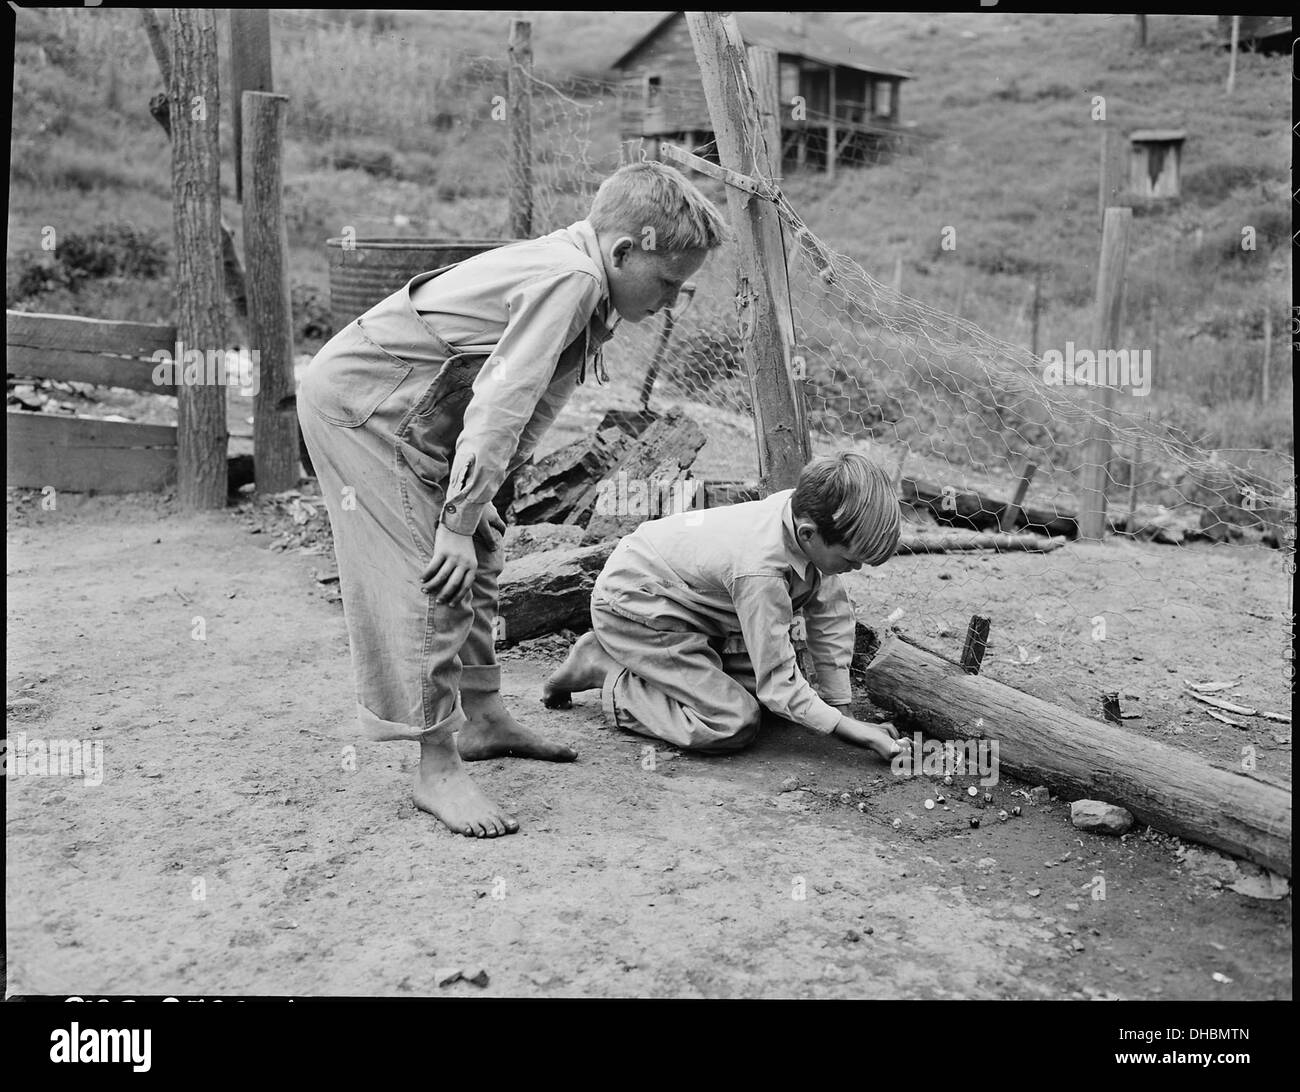 Donald Sergent shooting marbles while a pal looks on. P V & K Coal Company, Clover Gap Mine, Lejunior, Harlan County... 541352 Stock Photo